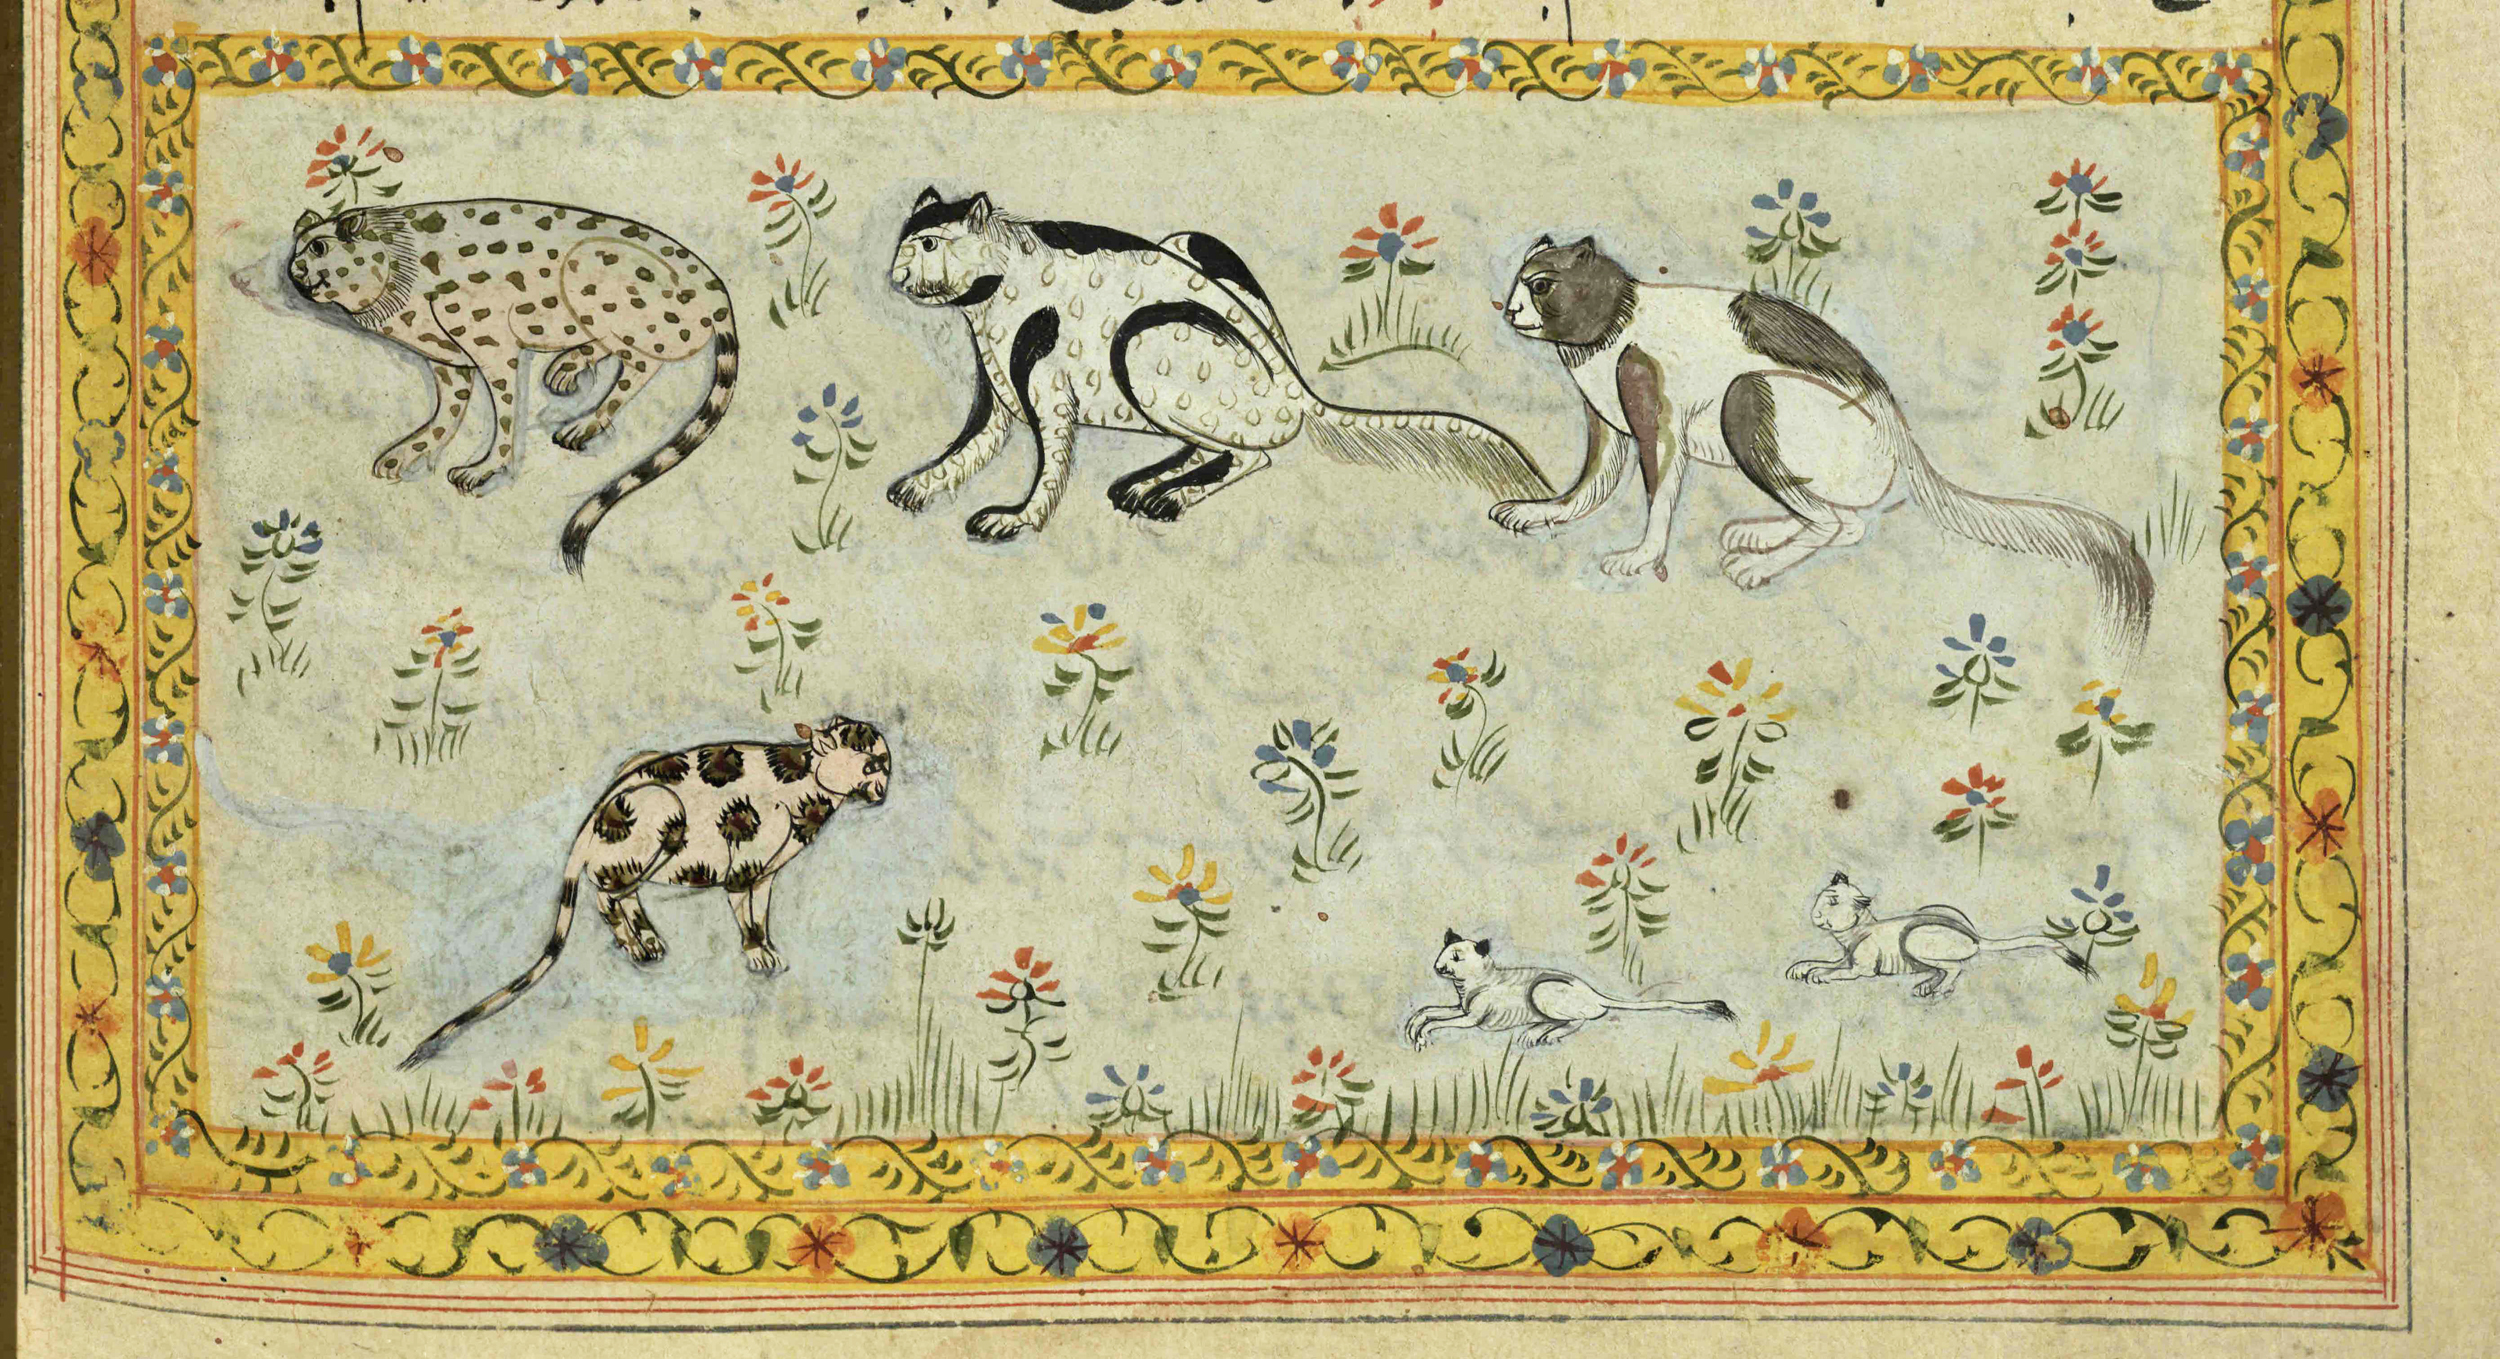 Cats from 17th or 18th century manuscript copy of “The Book of Wonders of the Age” (St Andrews ms32(o))